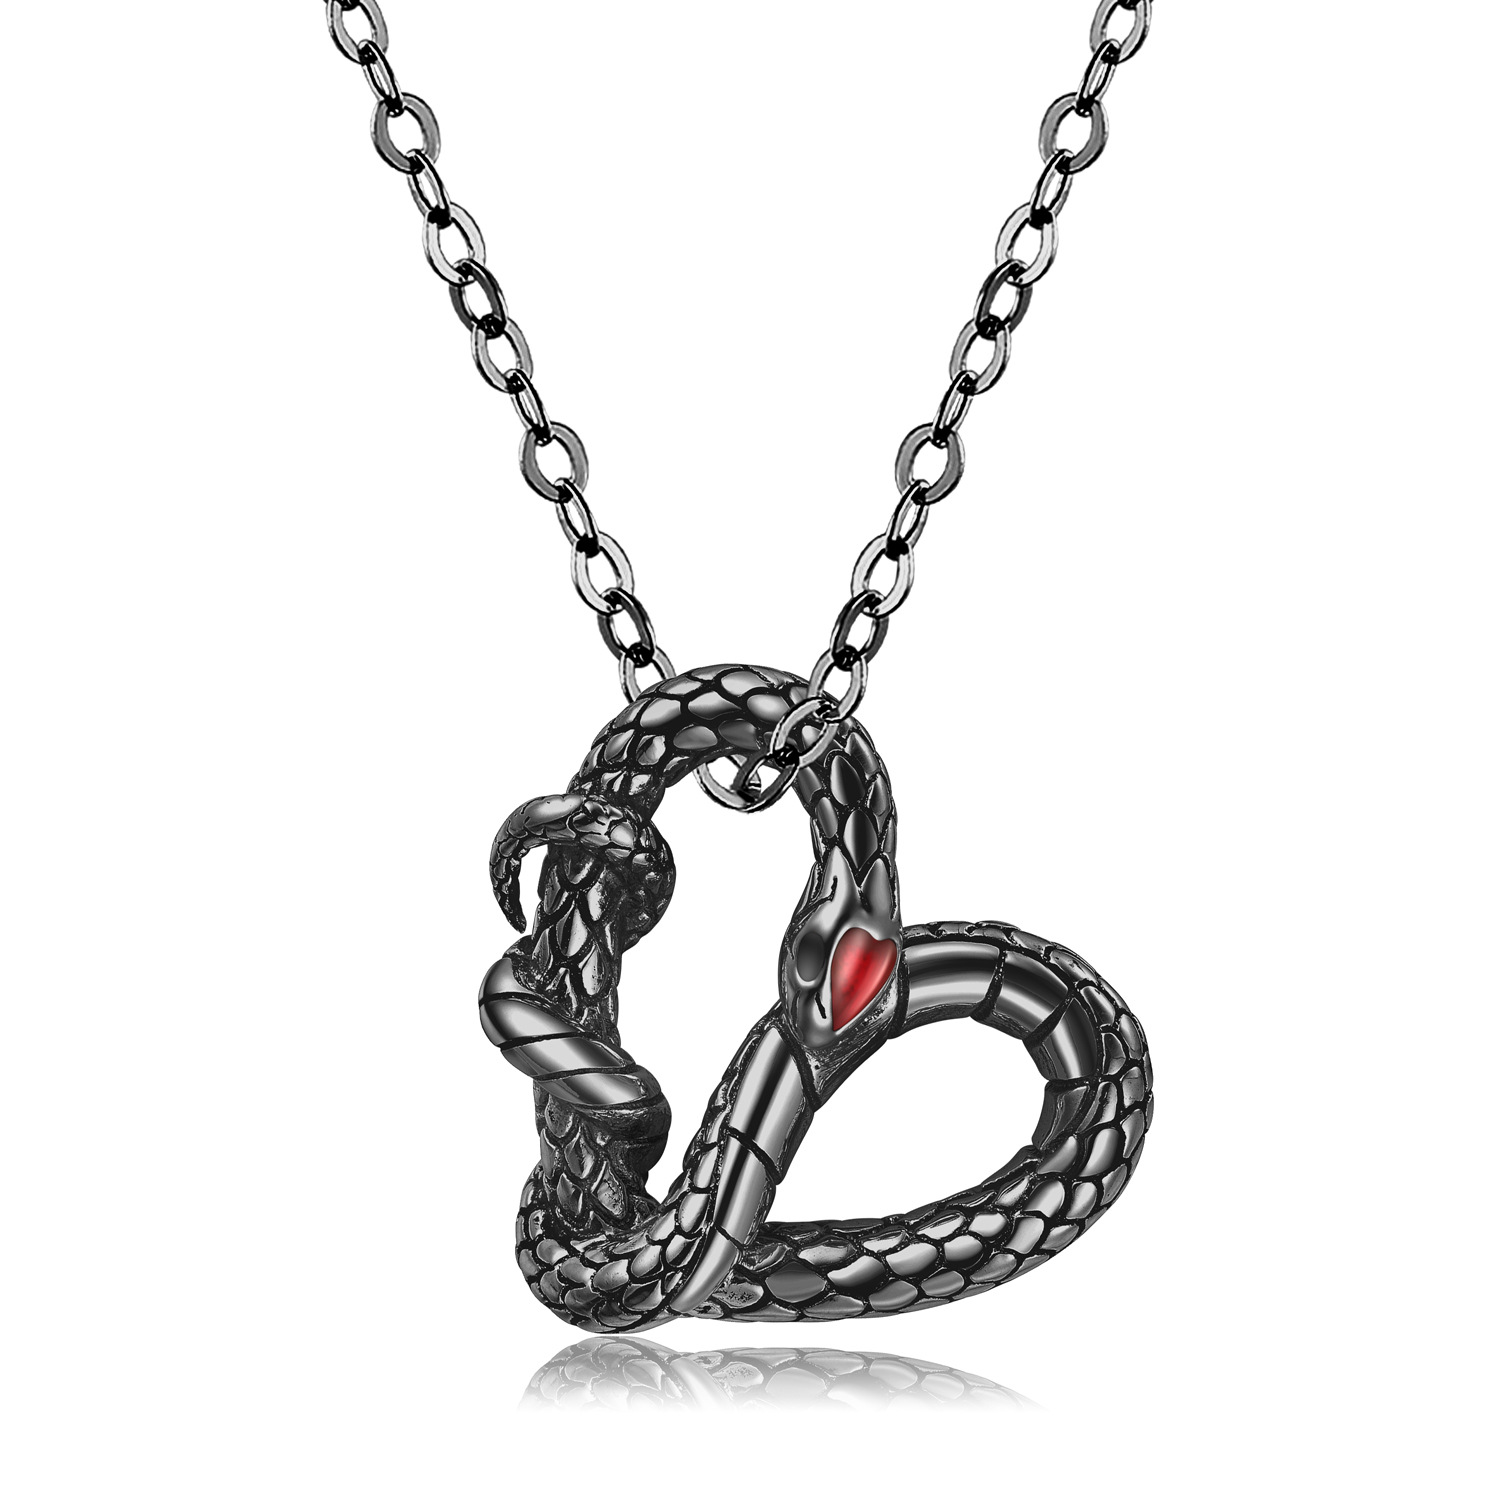 Black And Gold Snake Heart Textured Dark Style Sterling Silver Pendanat Necklace